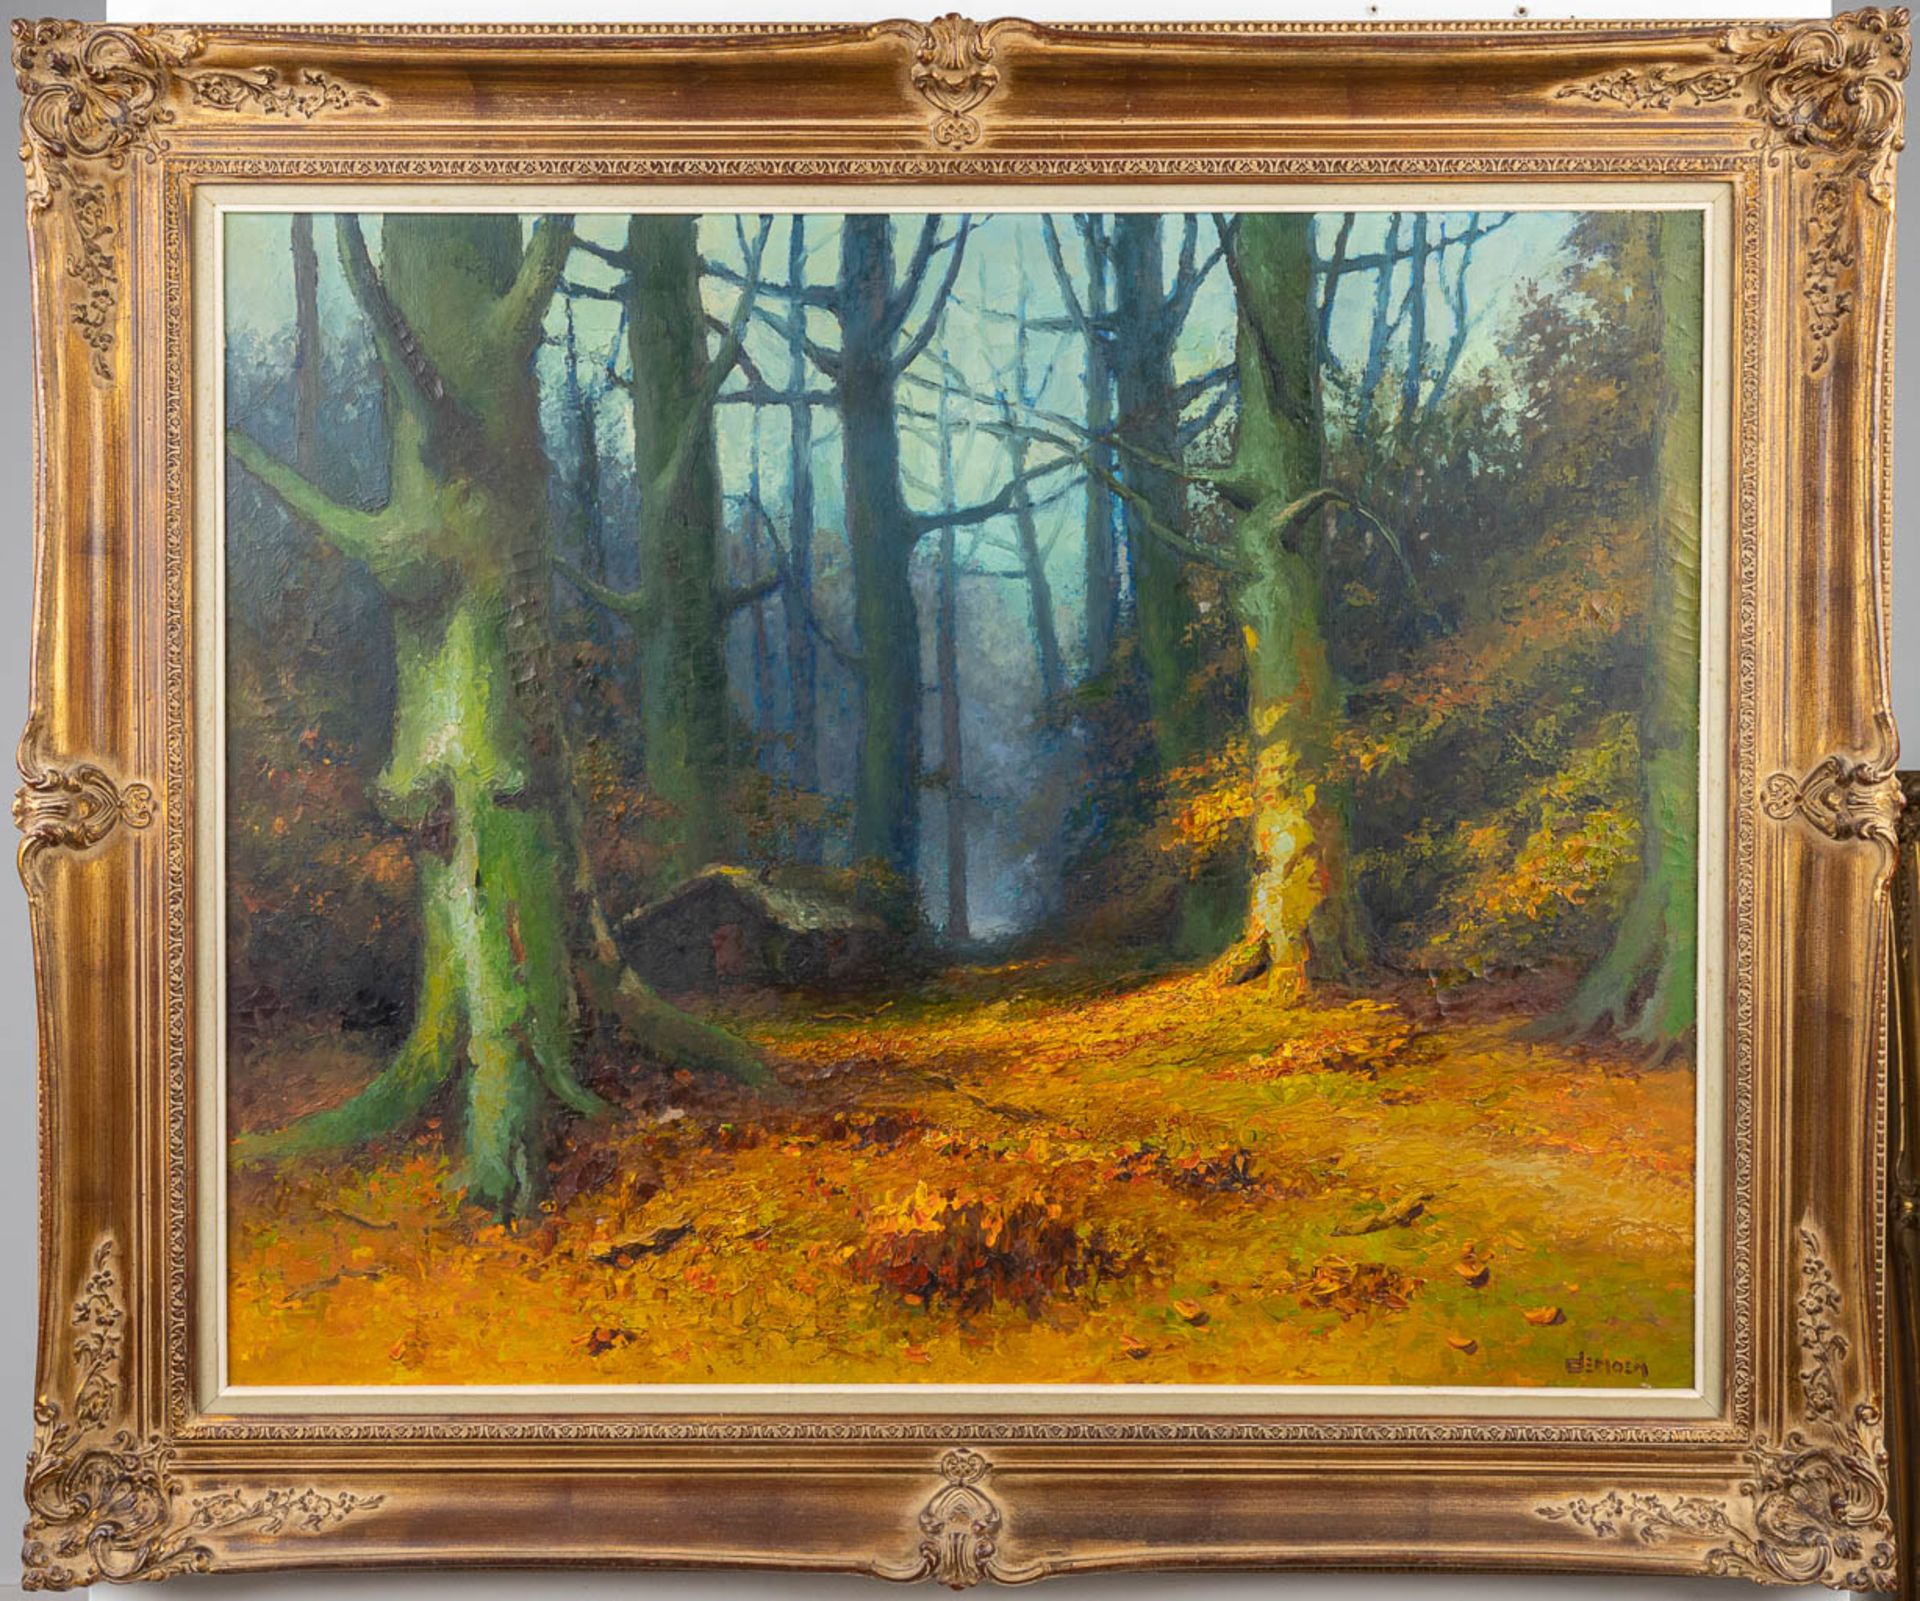 Albert DEMOEN (1916) 'Forest View' oil on canvas (100 x 80cm) - Image 4 of 6